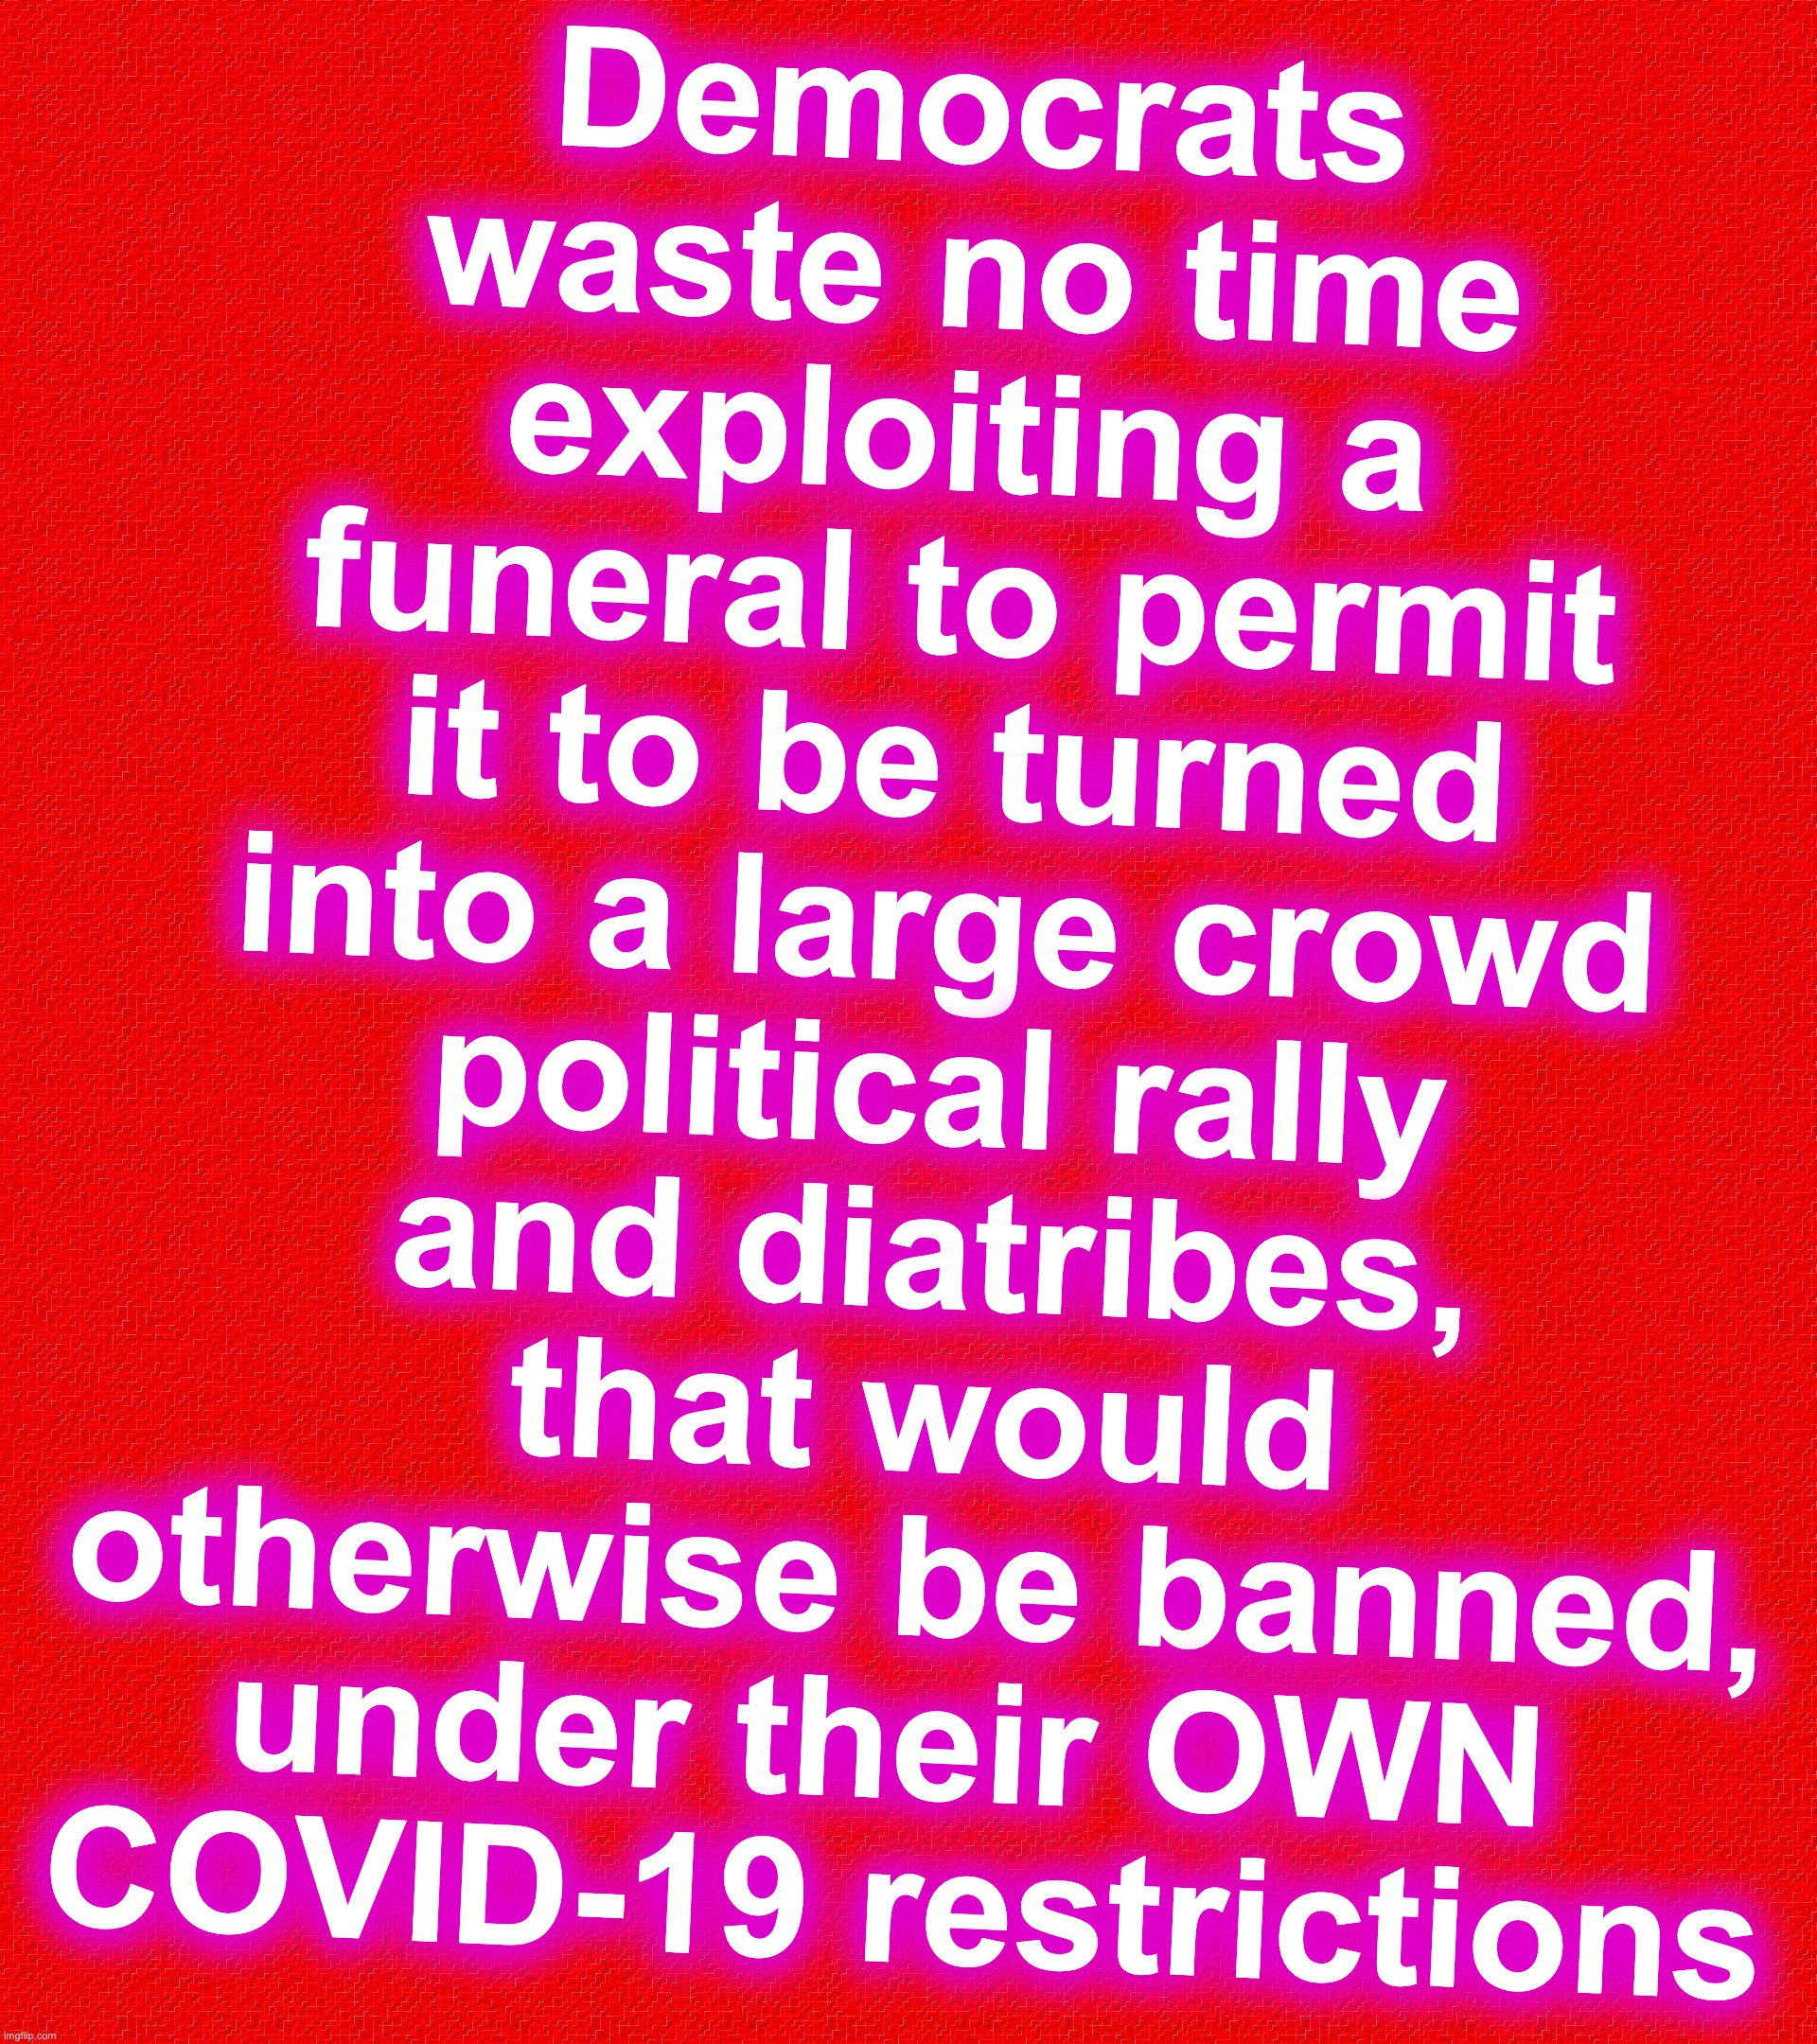 Democrats waste no time exploiting a funeral to permit it to be turned into a large crowd political rally and diatribes, that would otherwise be banned, under their OWN 
COVID-19 restrictions | image tagged in democrats,hypocrisy,contradiction,rally | made w/ Imgflip meme maker